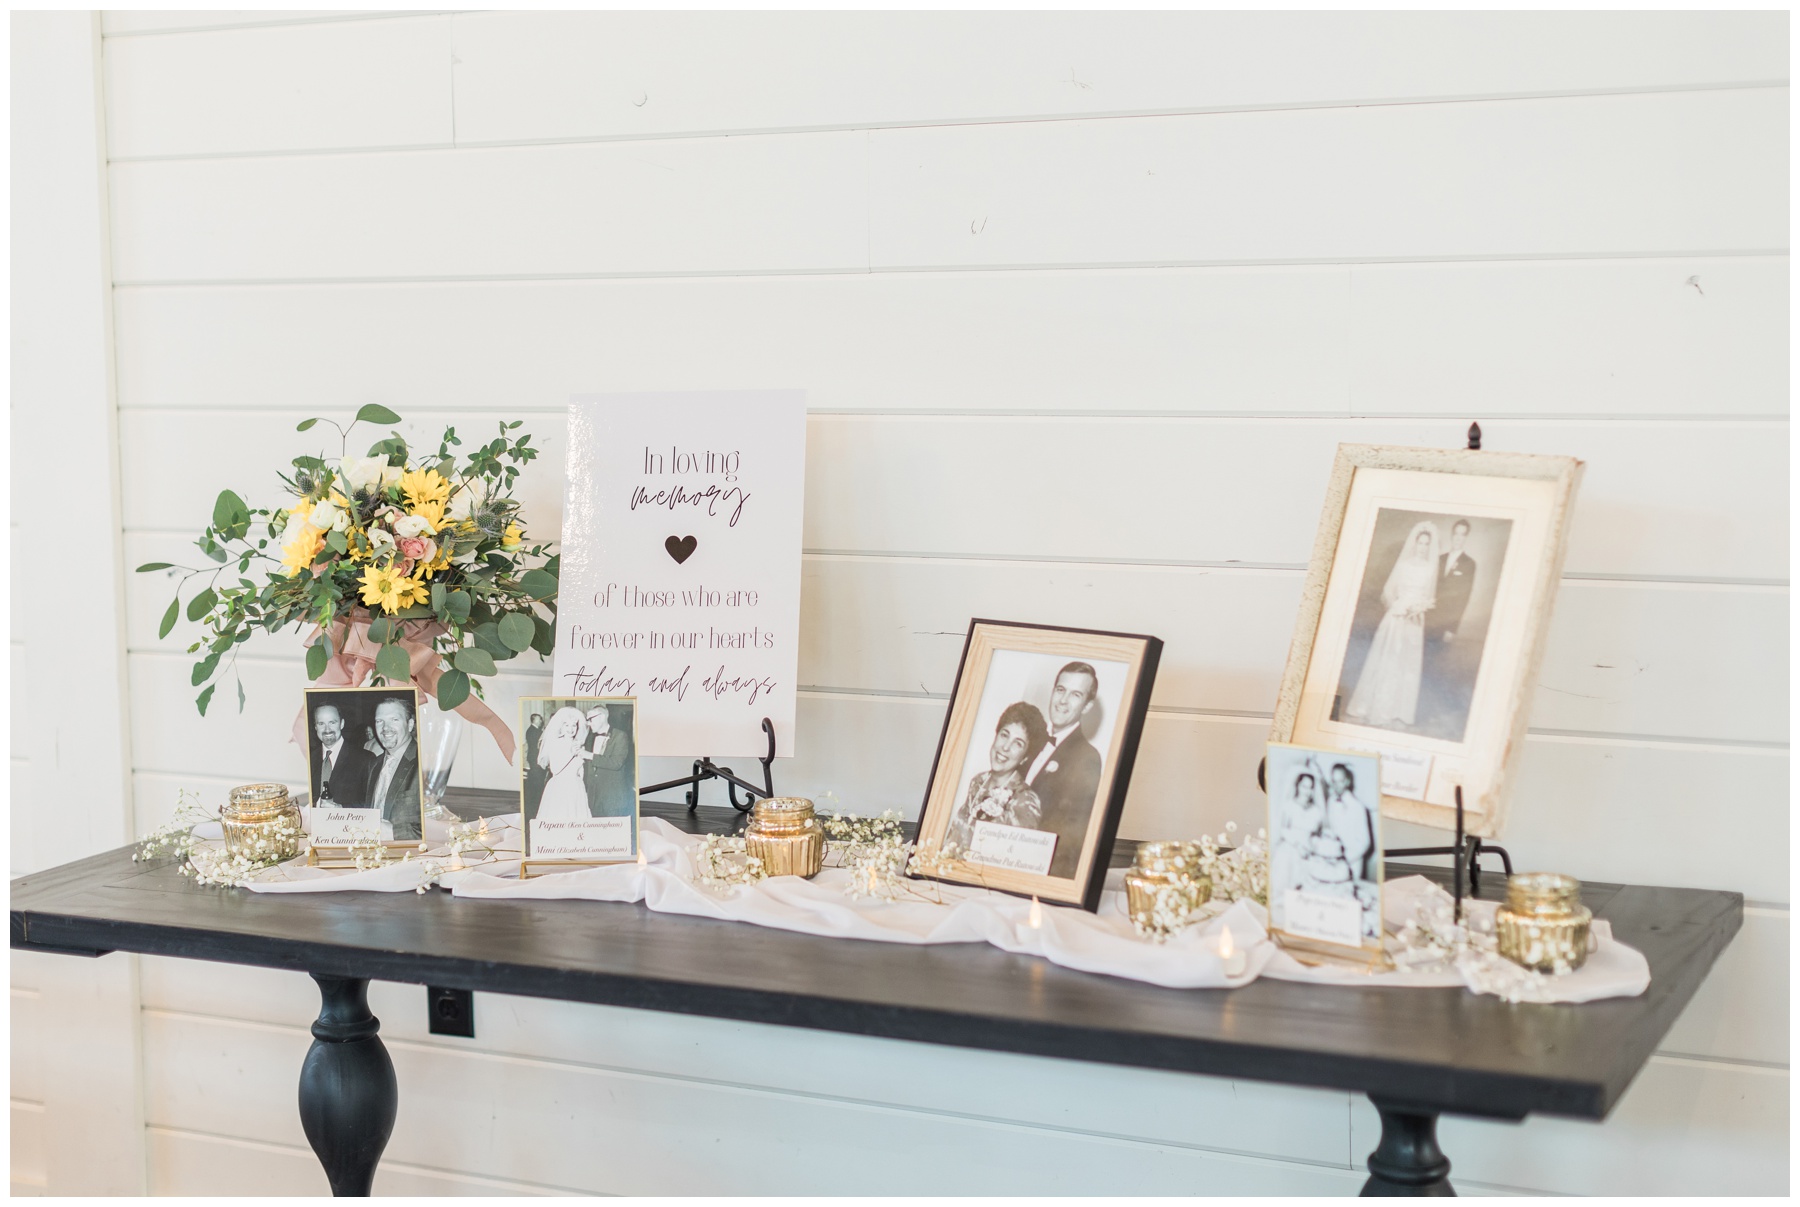 Wedding memory table with framed photos and a vase of flowers